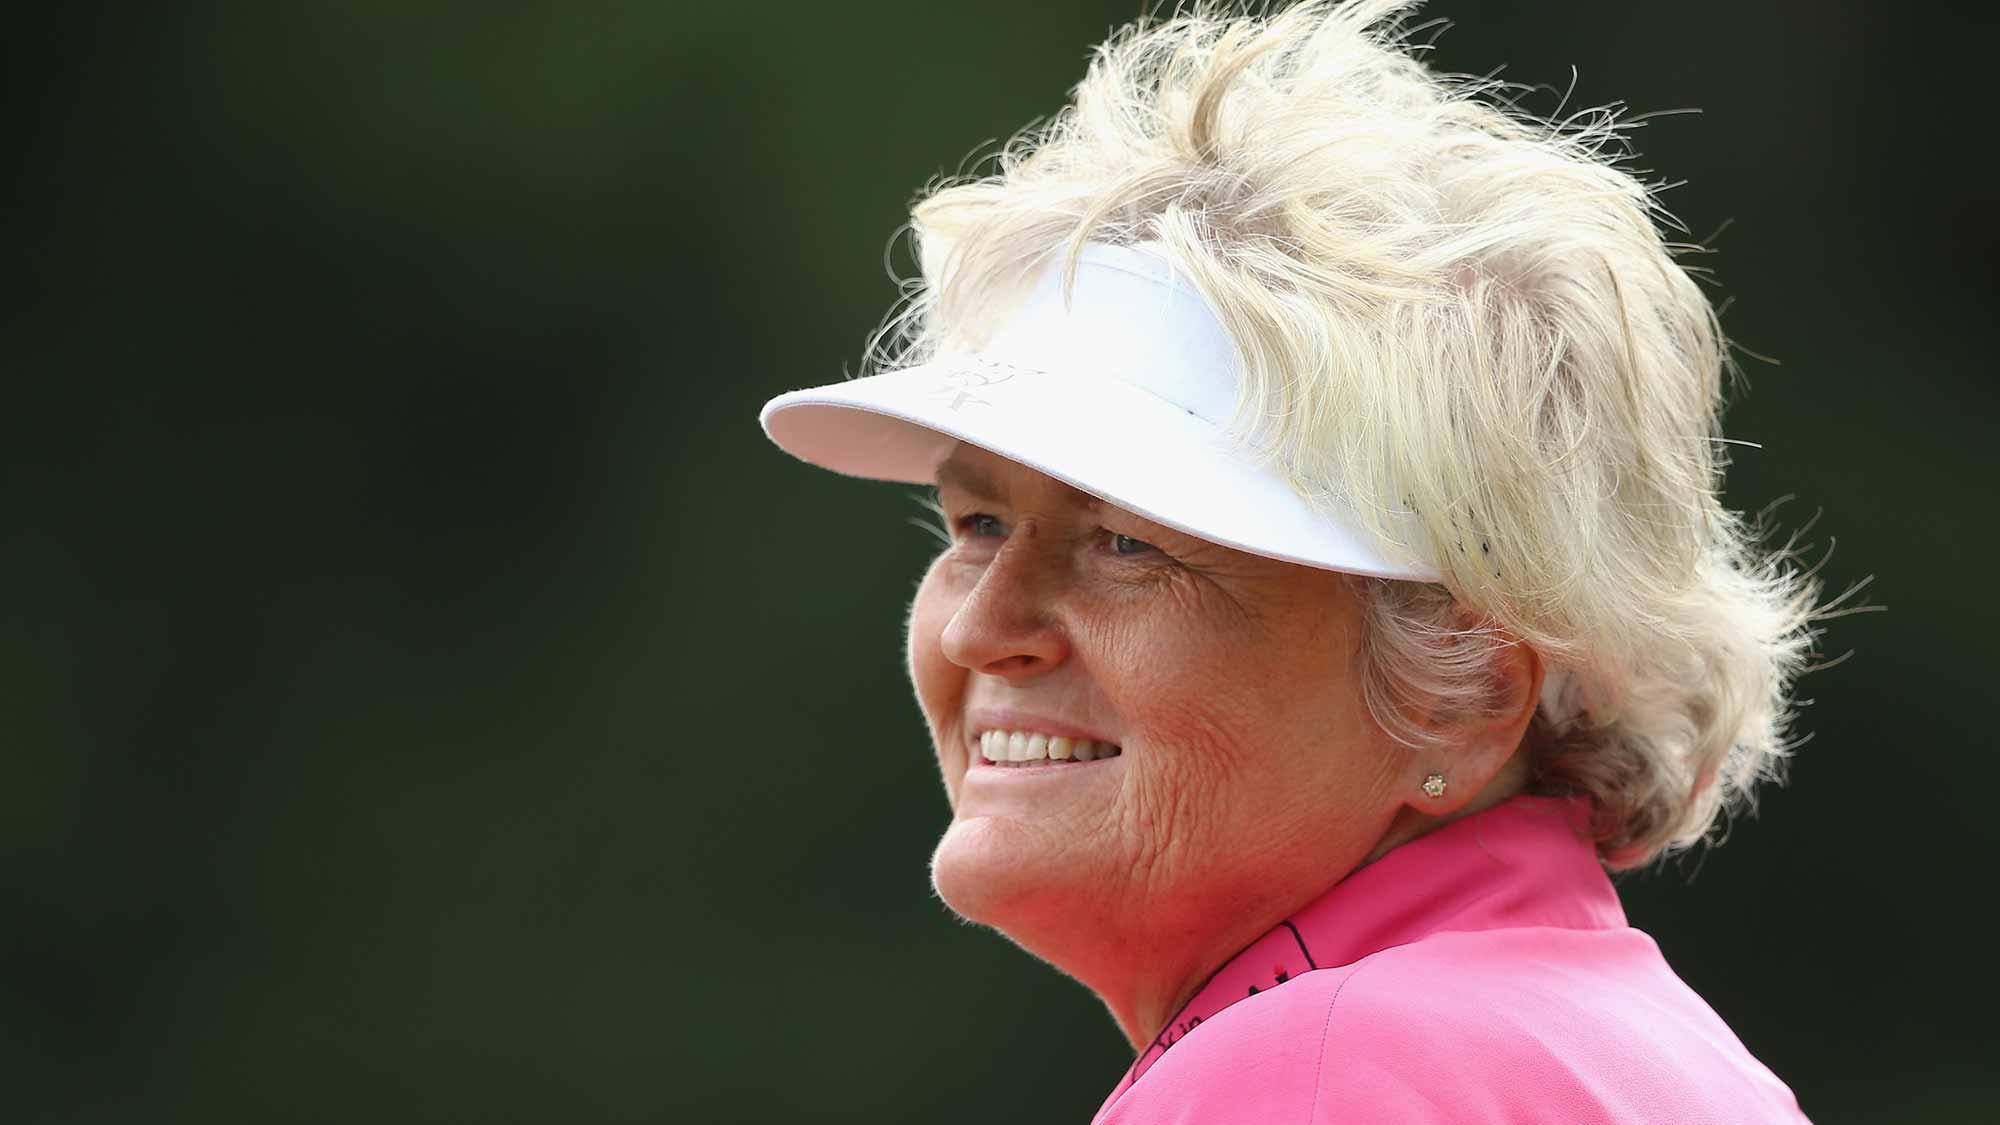 Dame Laura Davies Inducted Into World Golf Hall Of Fame Lpga Ladies Professional Golf